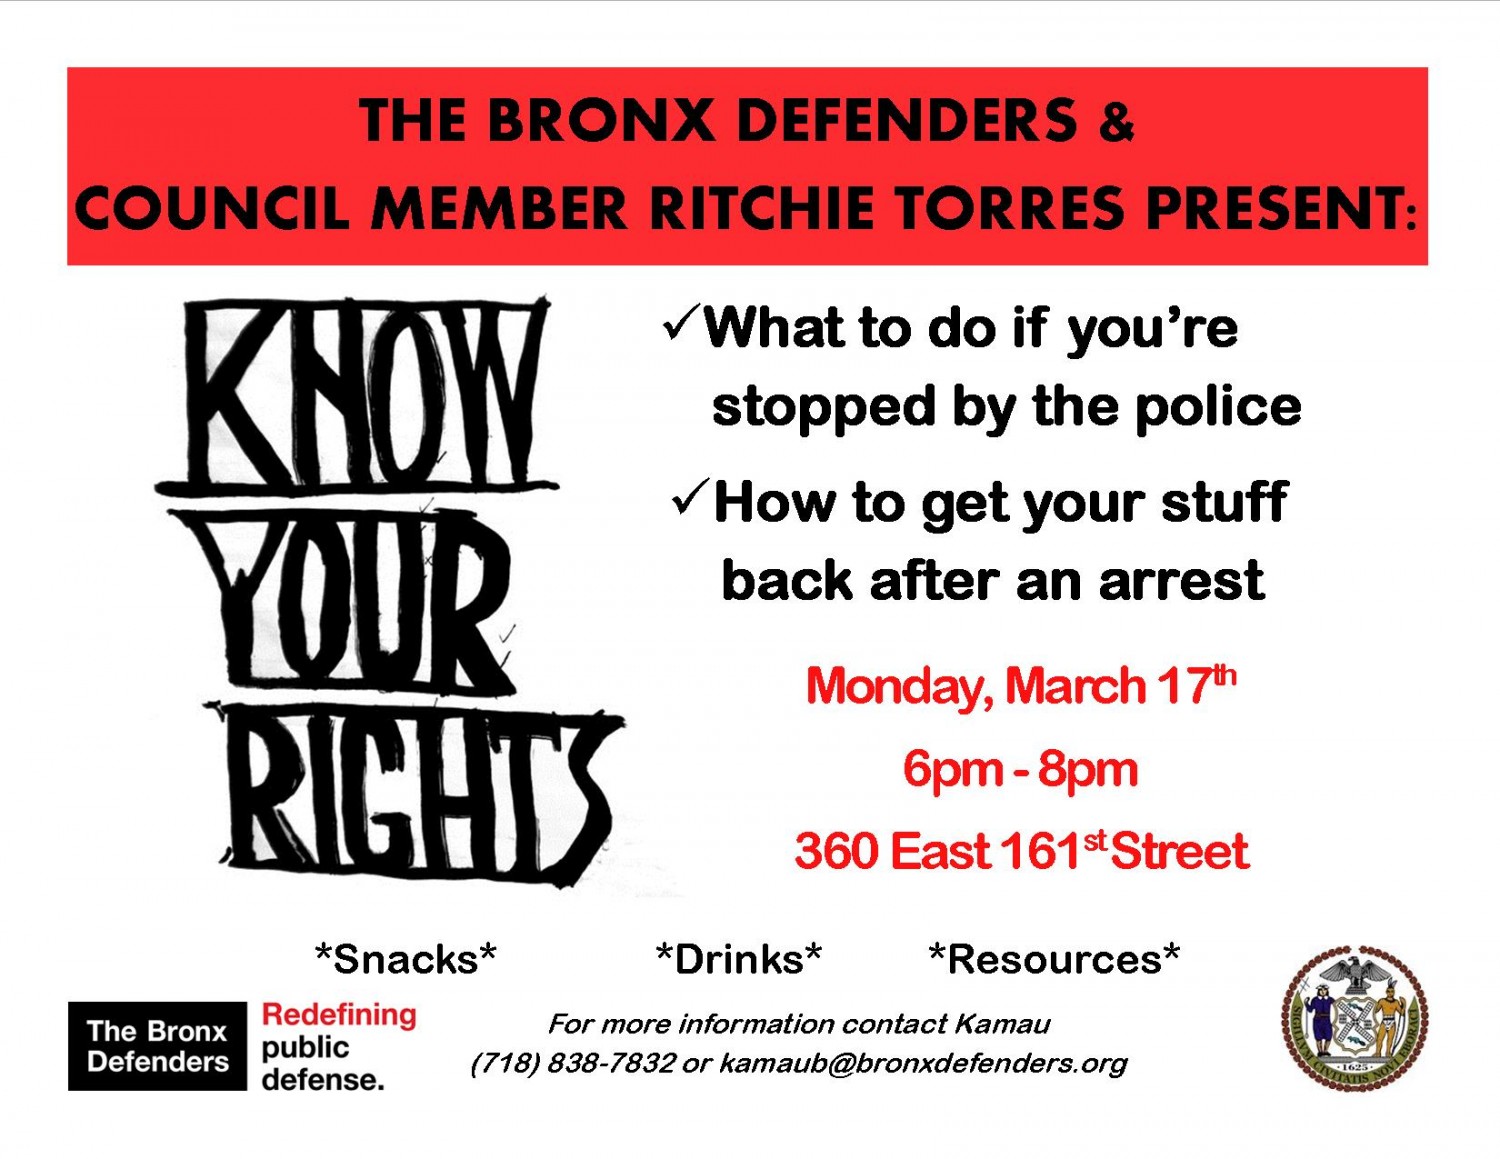 Join us! The Bronx Defenders and NYC Councilmember Ritchie Torres hosting a Know Your Rights event Monday, March 17